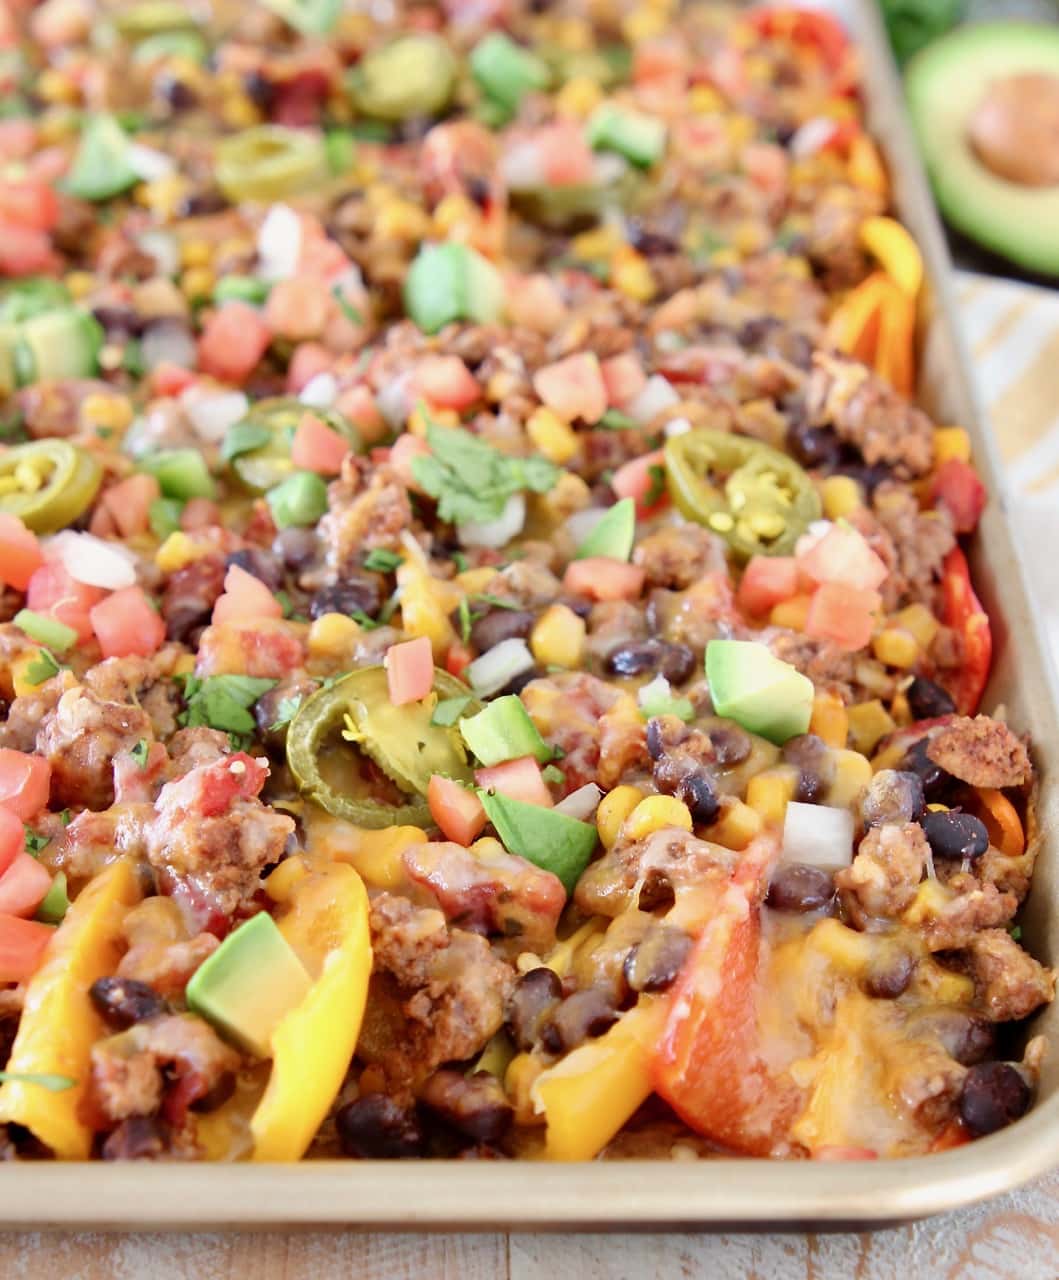 Low Carb Nachos made with sweet mini peppers topped with taco seasoned turkey, beans, tomatoes, corn, jalapenos and cheese